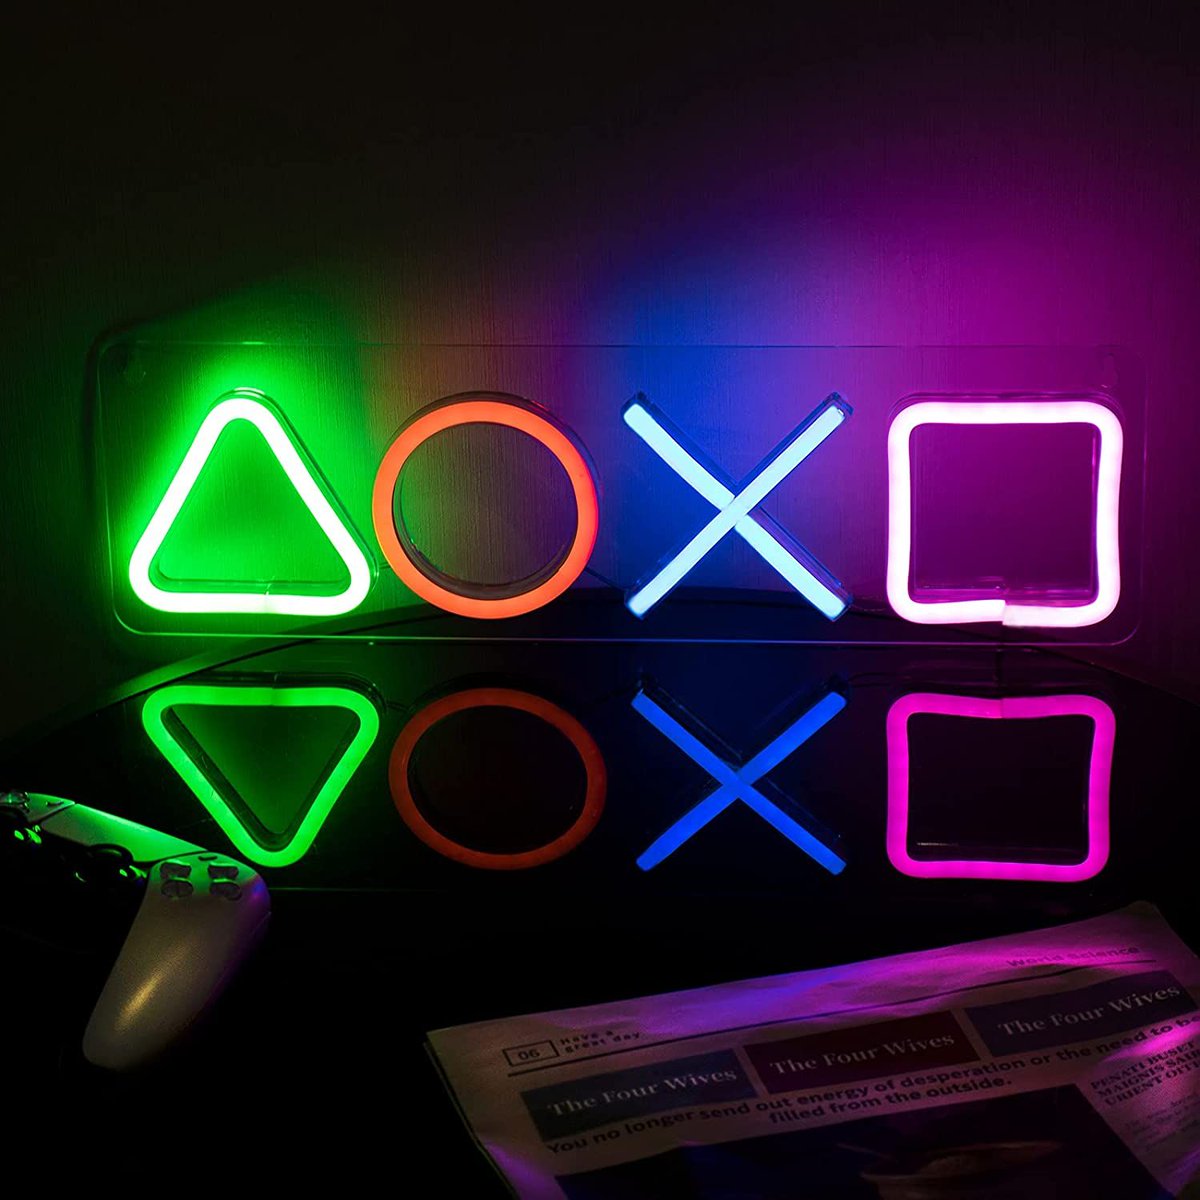 RT @FatKidDeals: Gaming Neon Sign for $27.99!
*Coupon on page

https://t.co/ThP7pAyiMy https://t.co/oKFsQLqxUL